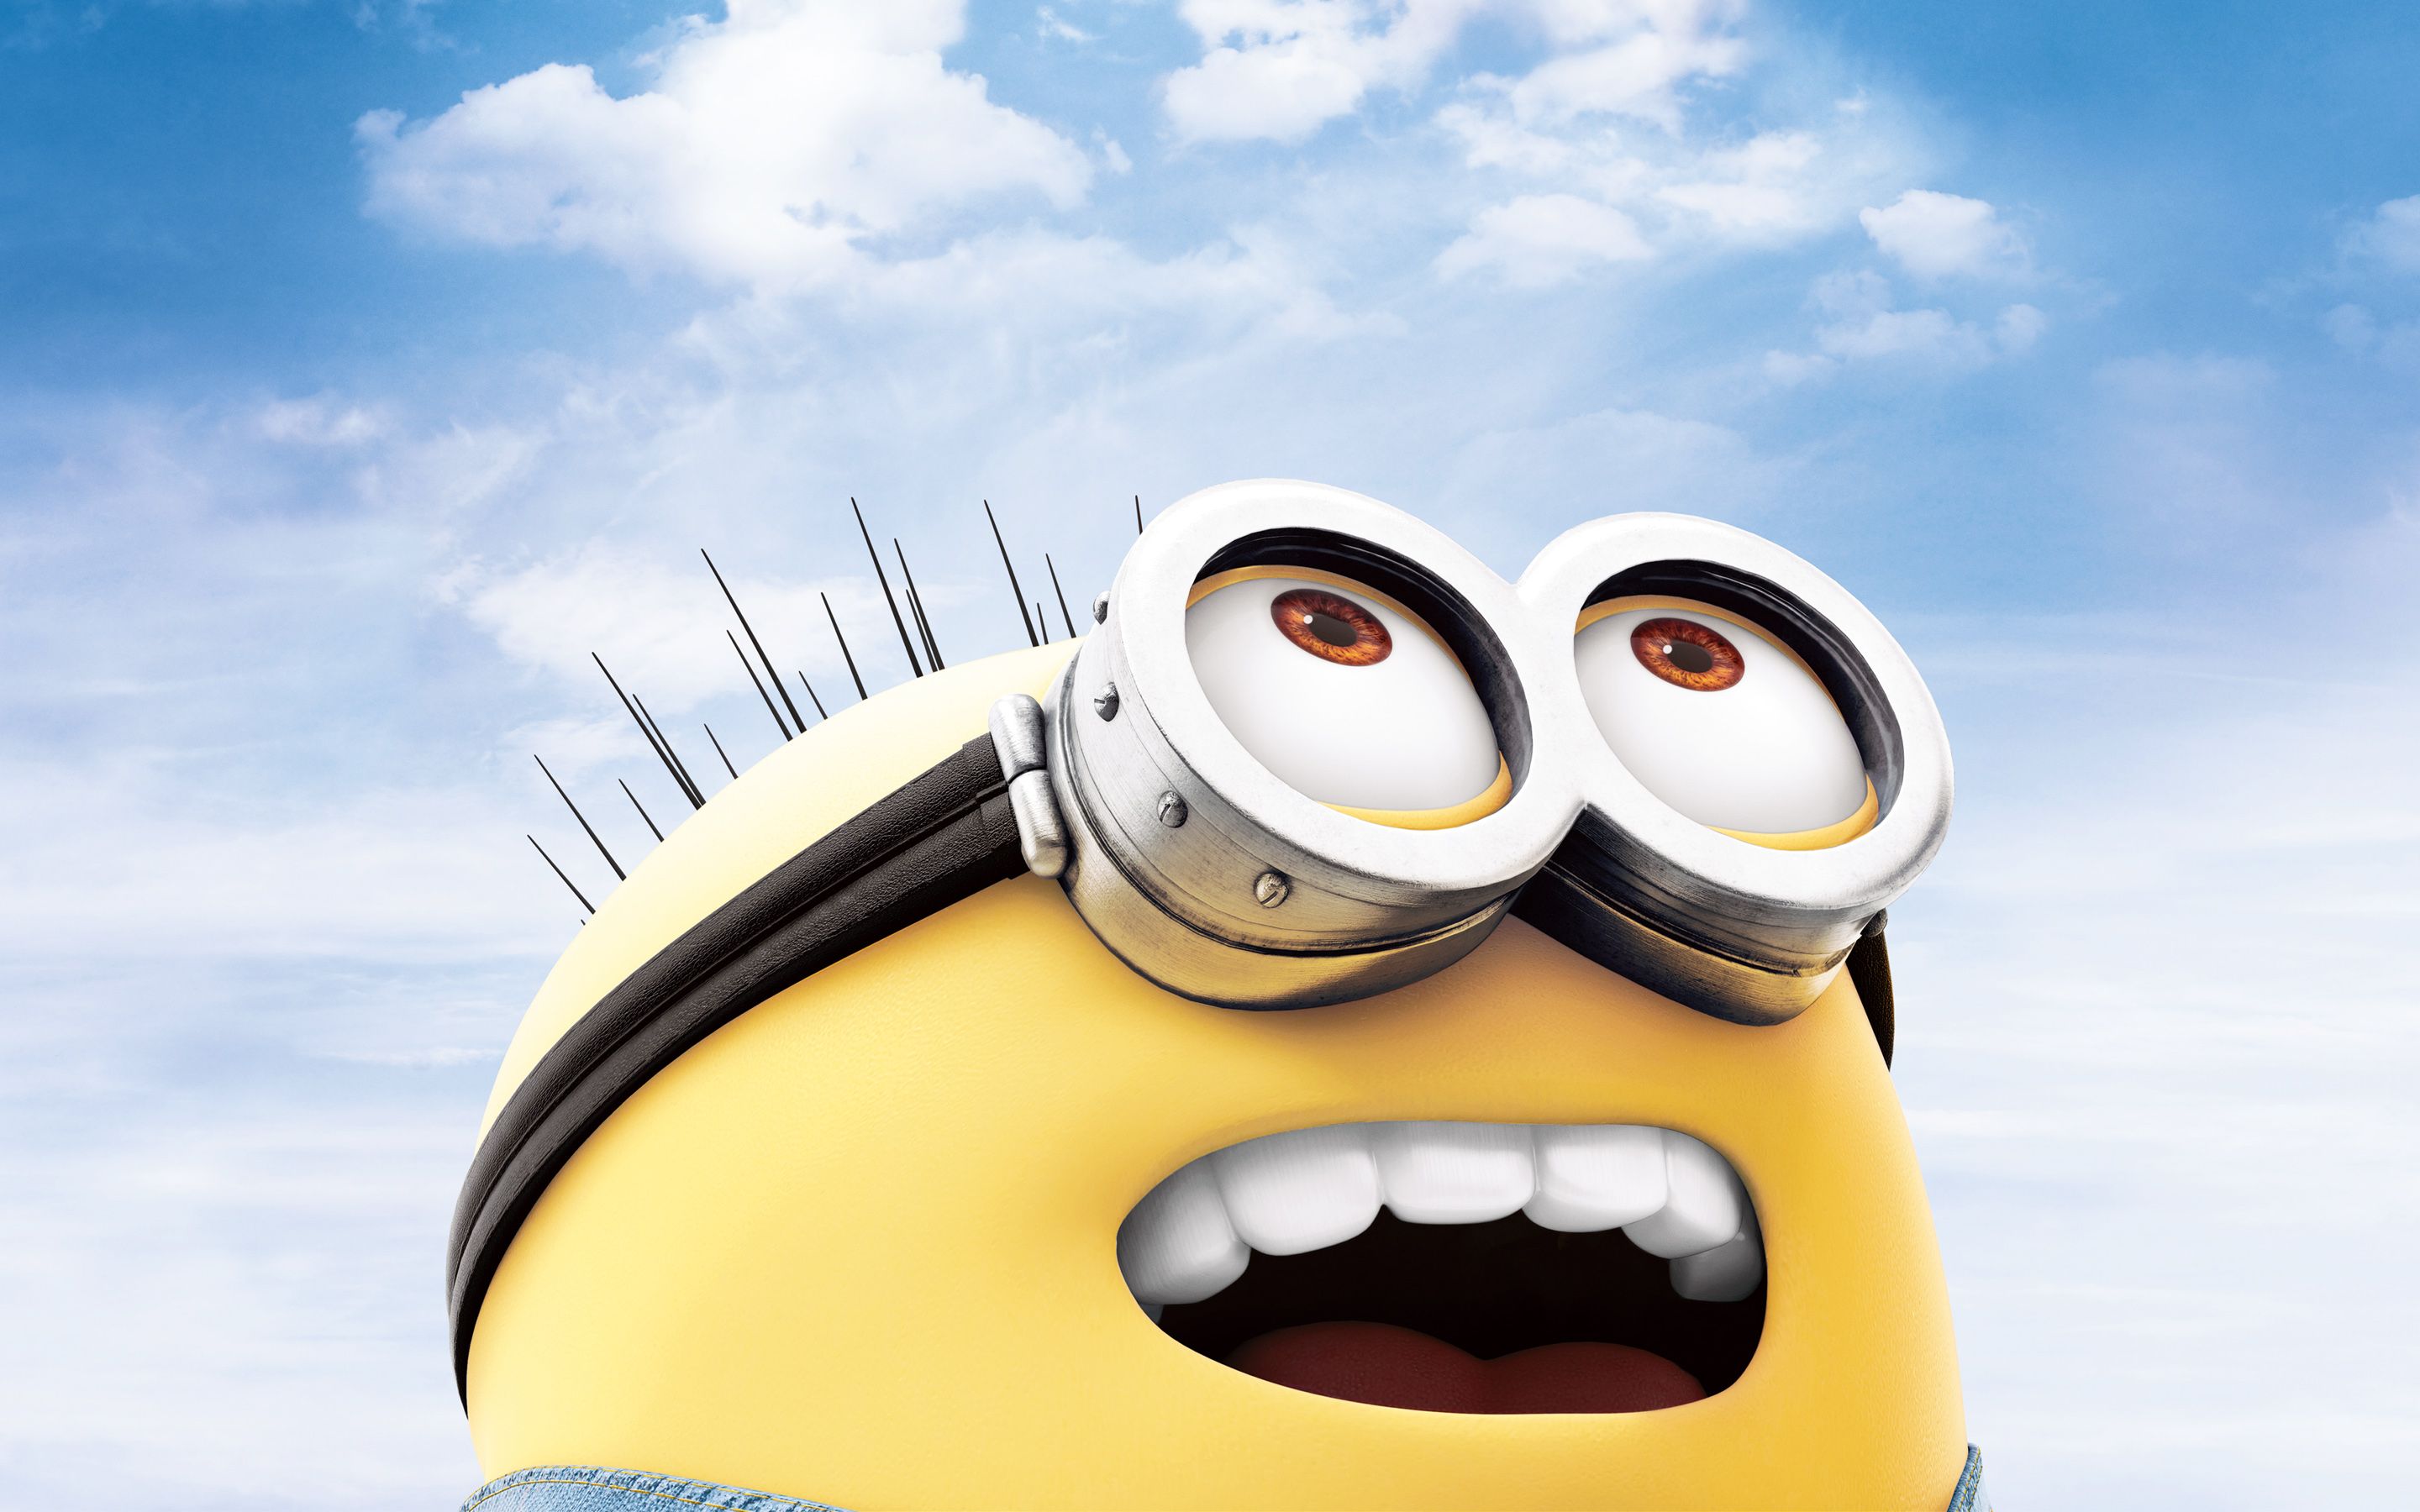 Minion in Despicable Me 2 Wallpapers HD Backgrounds